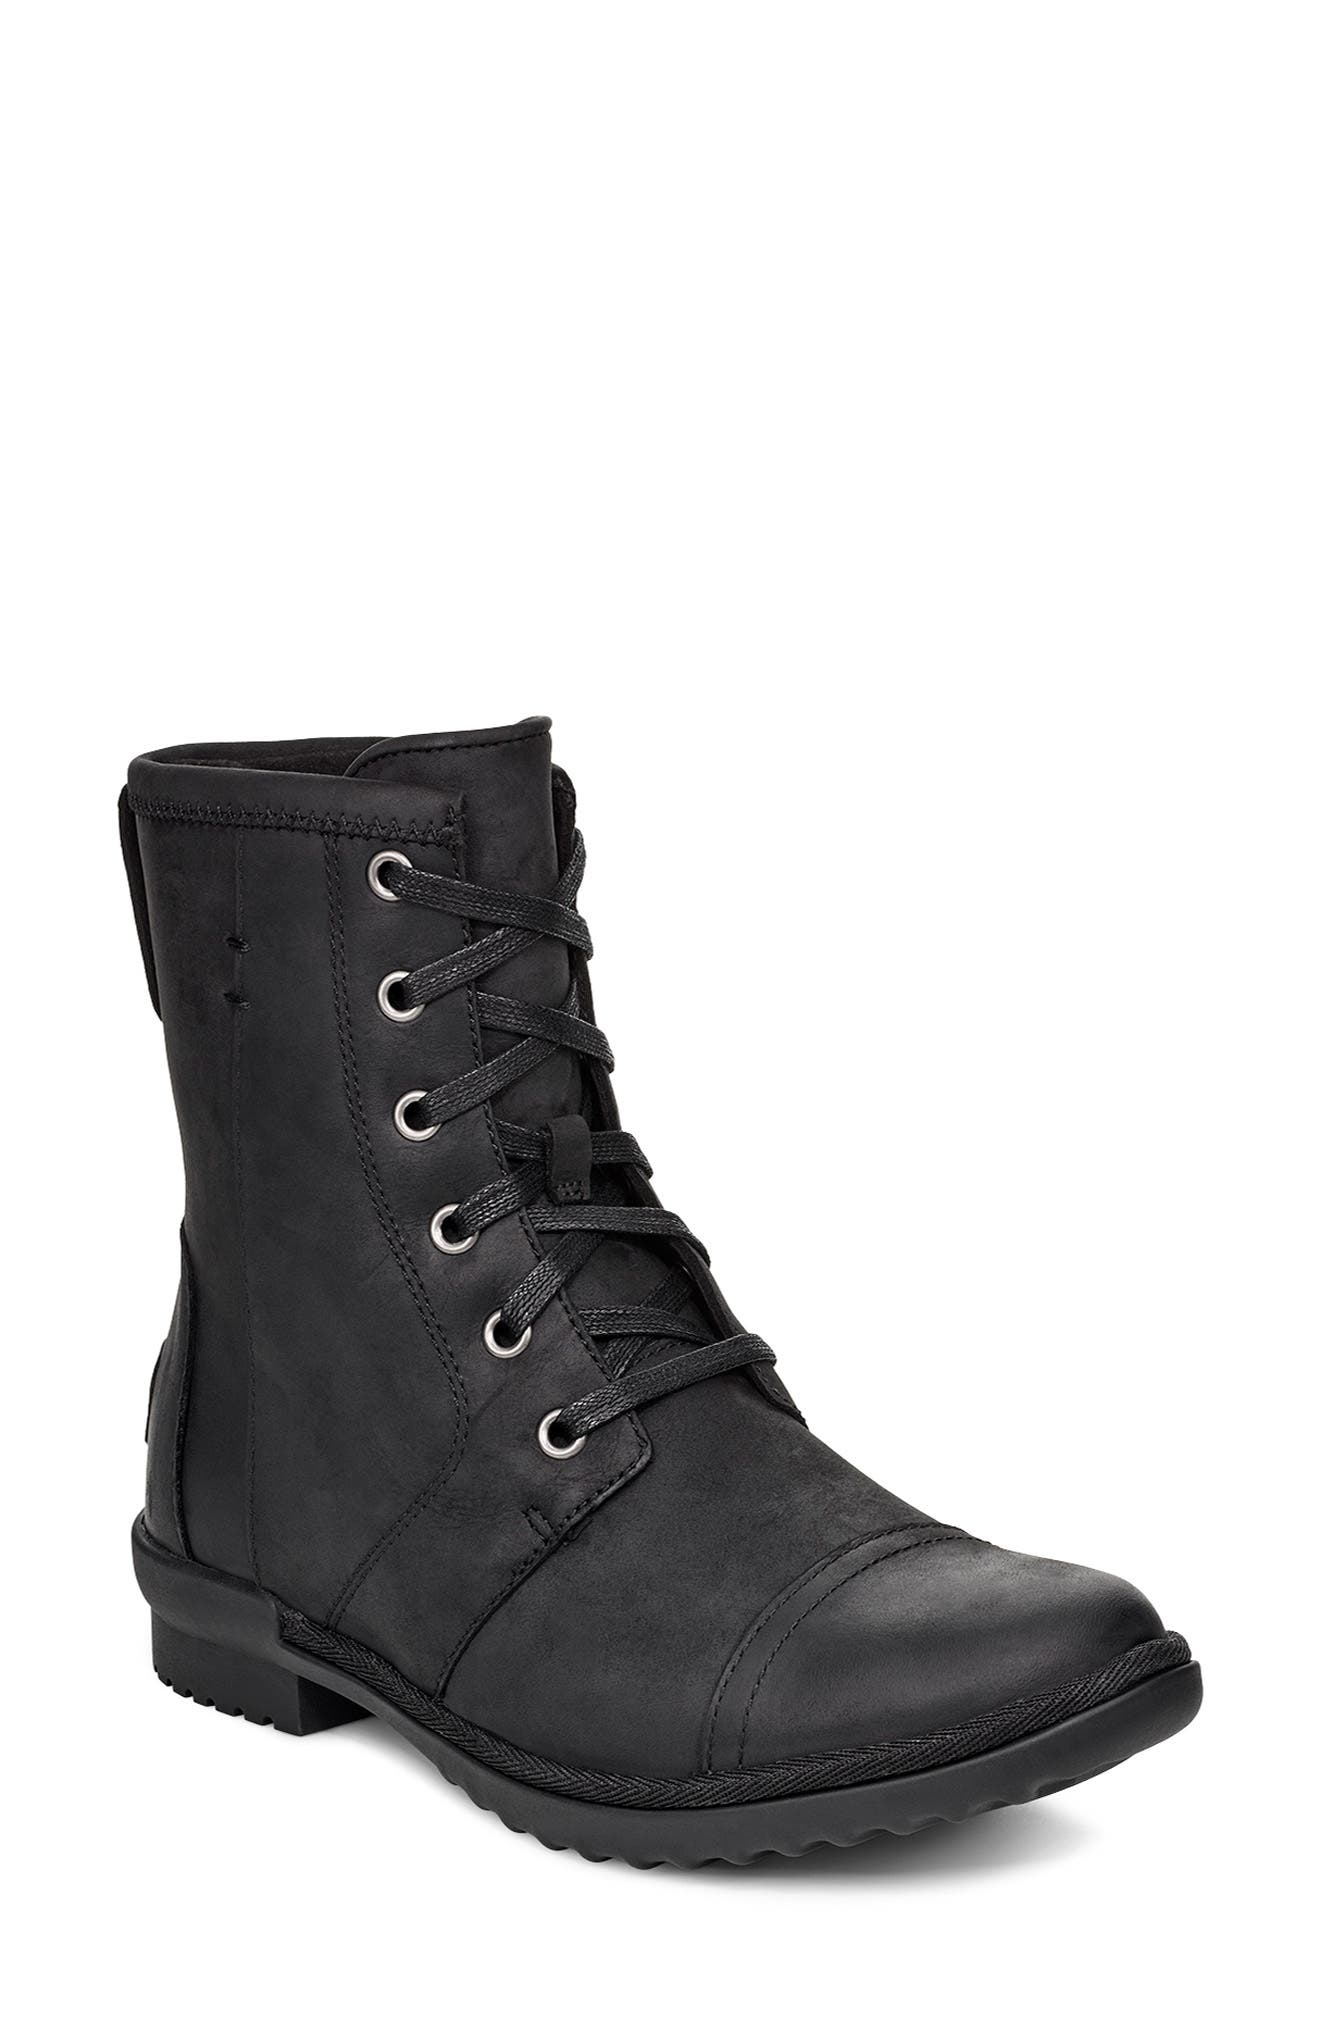 ugg women's lace up boot